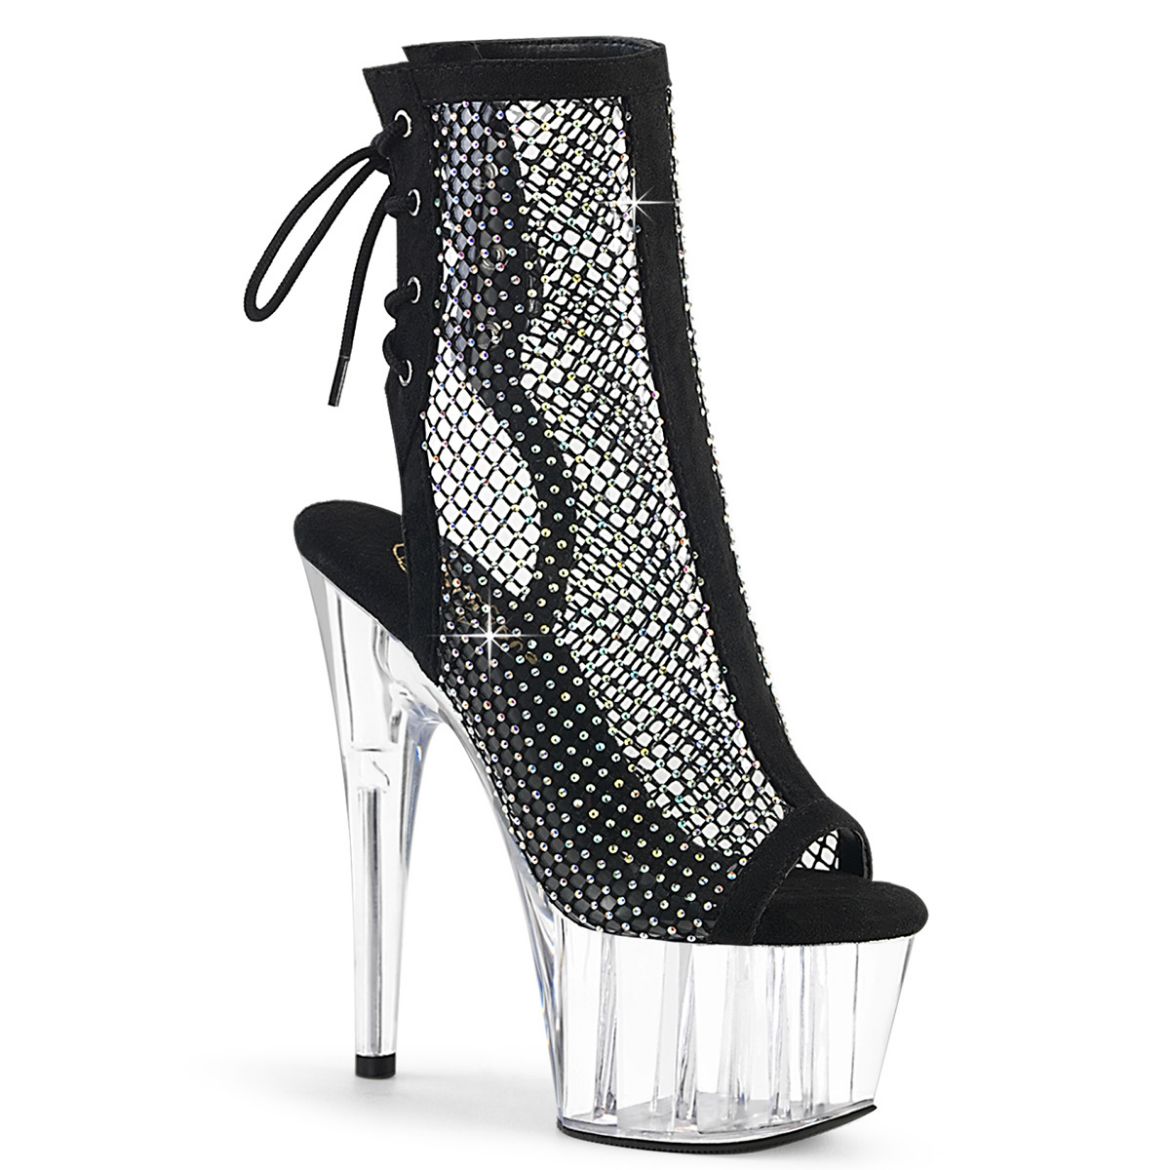 Product image of Pleaser ADORE-1018RM Blk Faux Suede-RS Mesh/Clr 7 Inch Heel 2 3/4 Inch PF Open Toe/Heel Ankle Boot